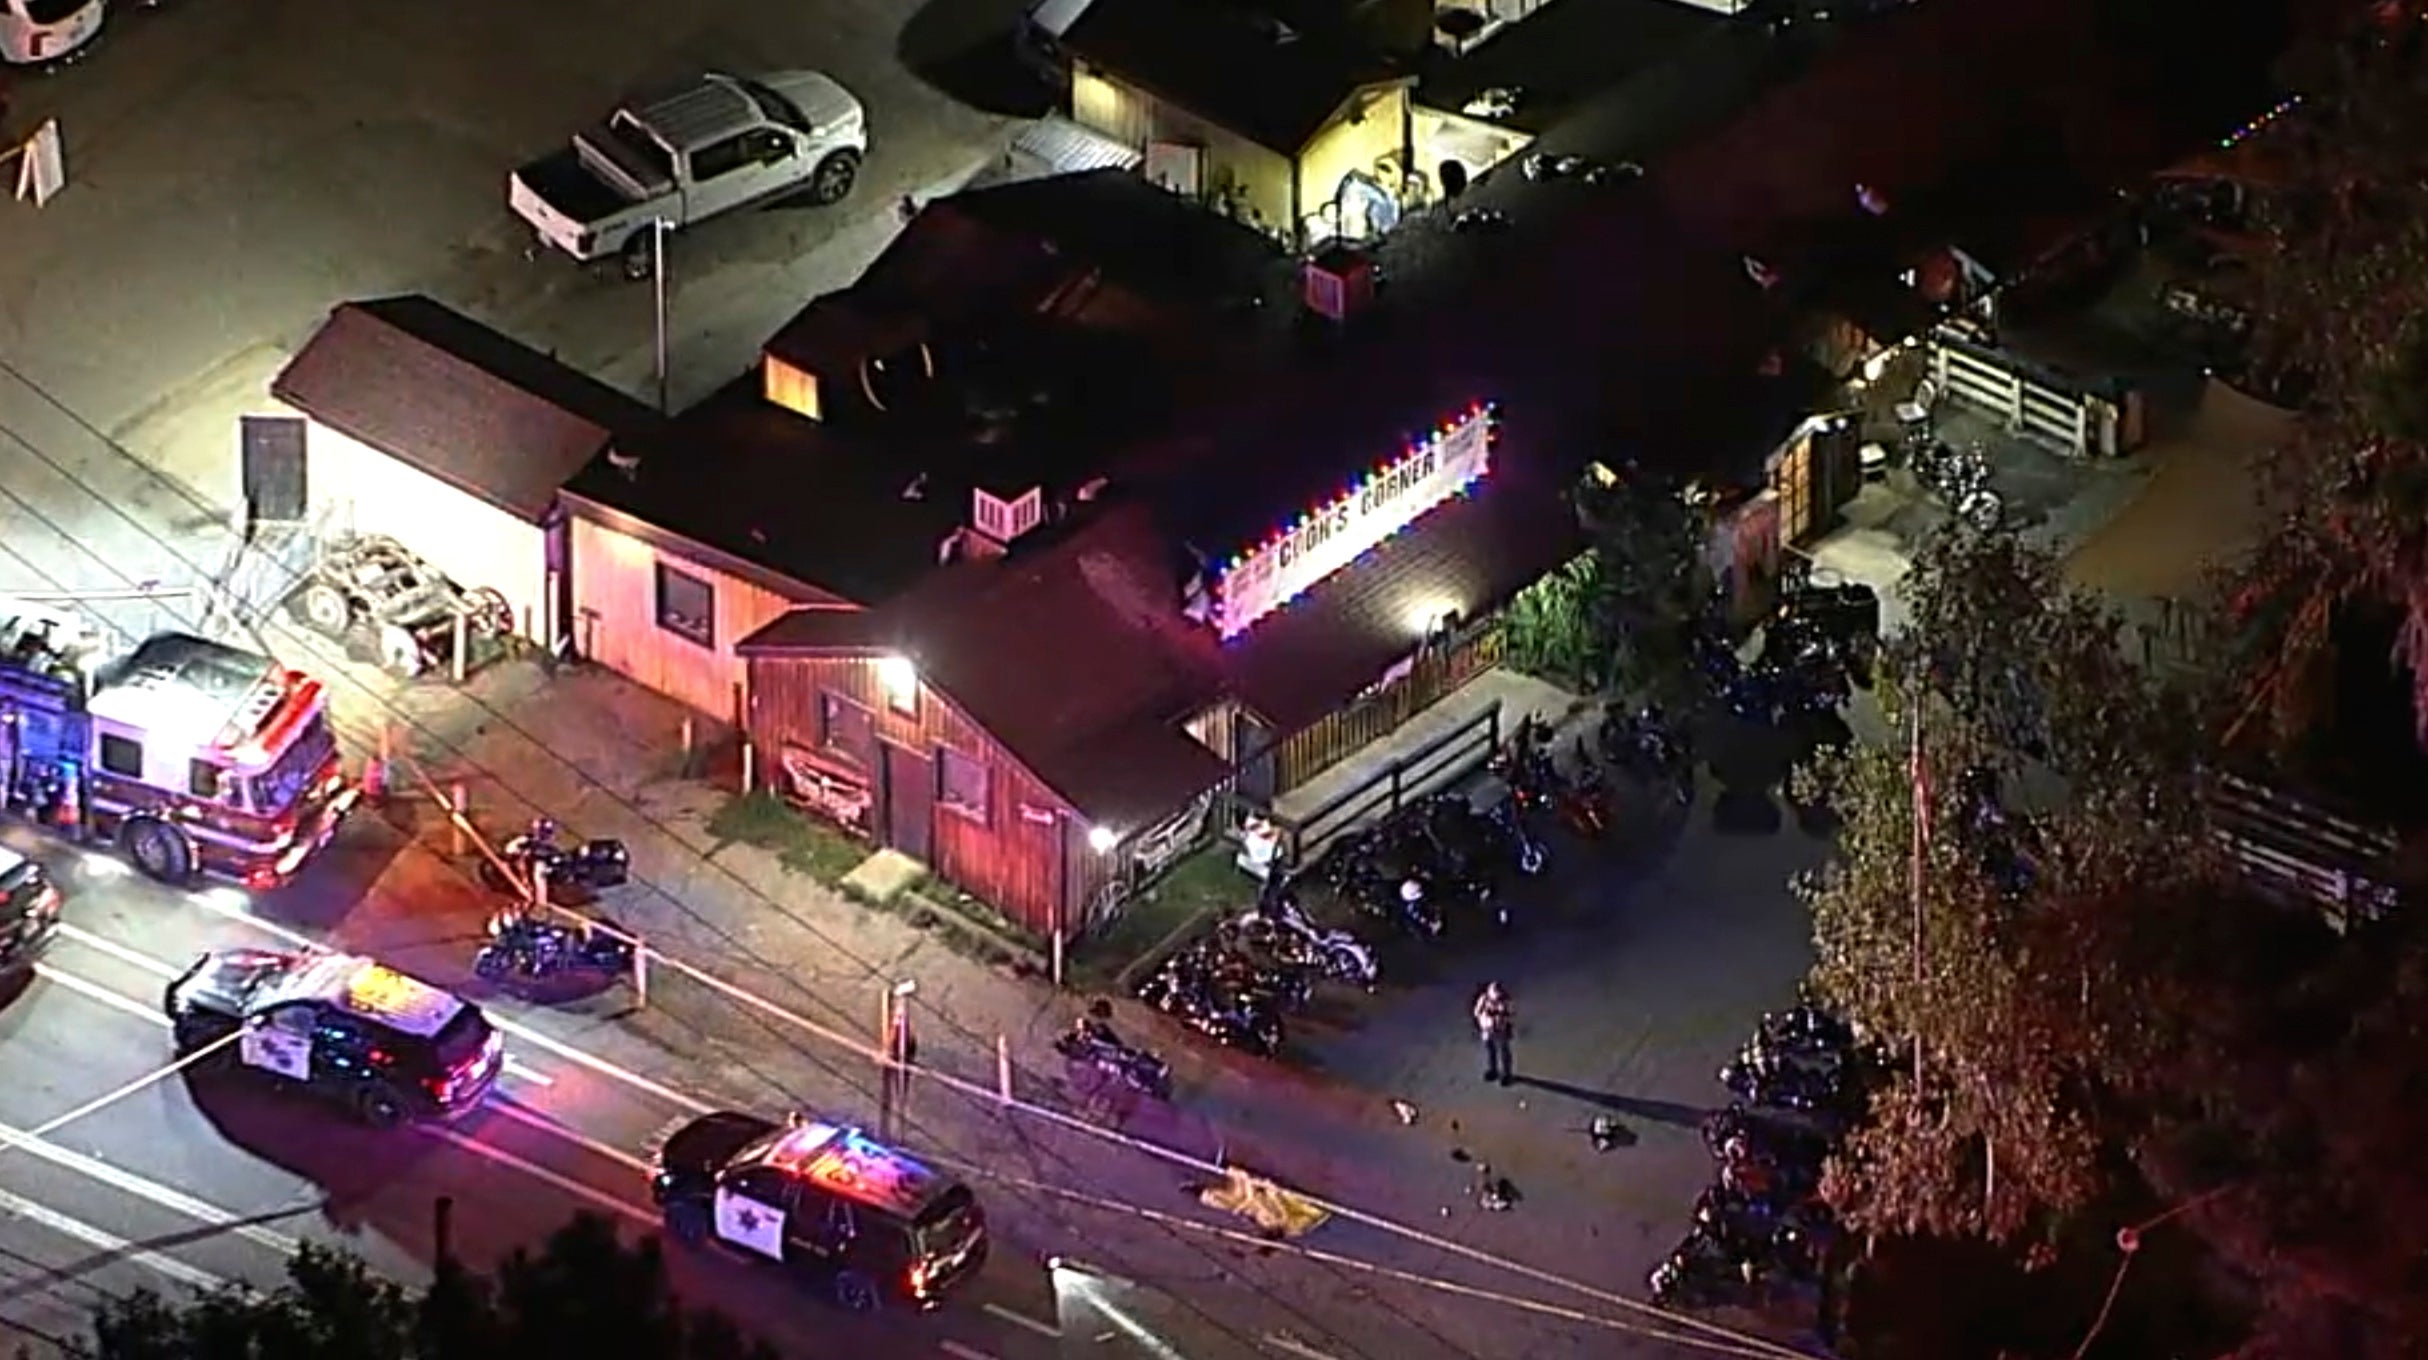 Cook’s Corner, known to be one of the most famous biker bars was left in shock and heartbreak on Wednesday night after a mass shooting left at least four dead